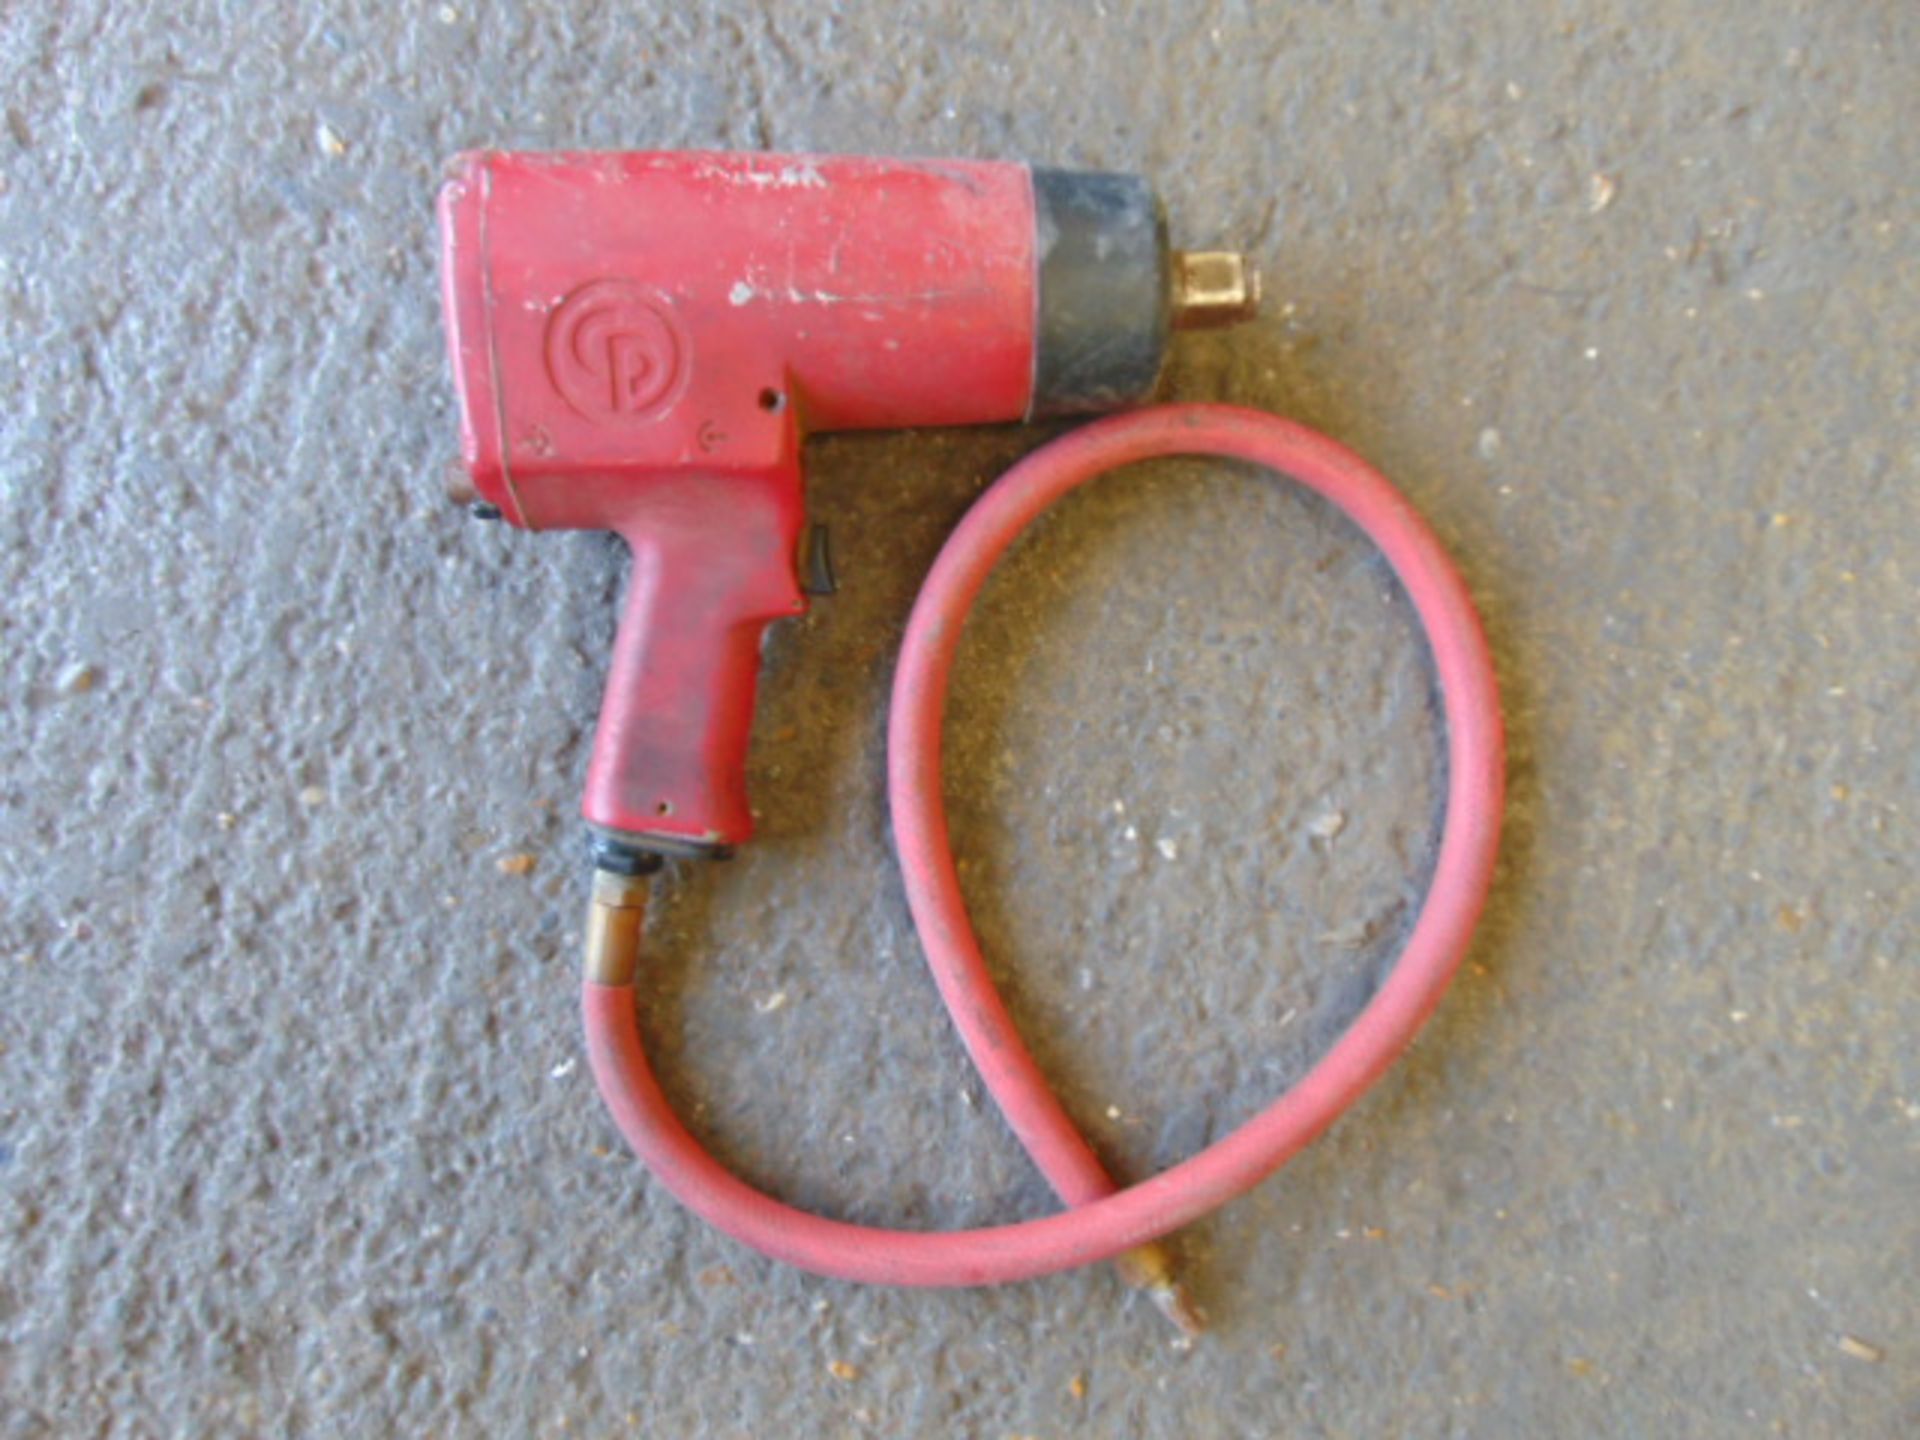 Chicago Pneumatic CP9560 industrial grade 3/4 inch impact wrench - Image 2 of 5